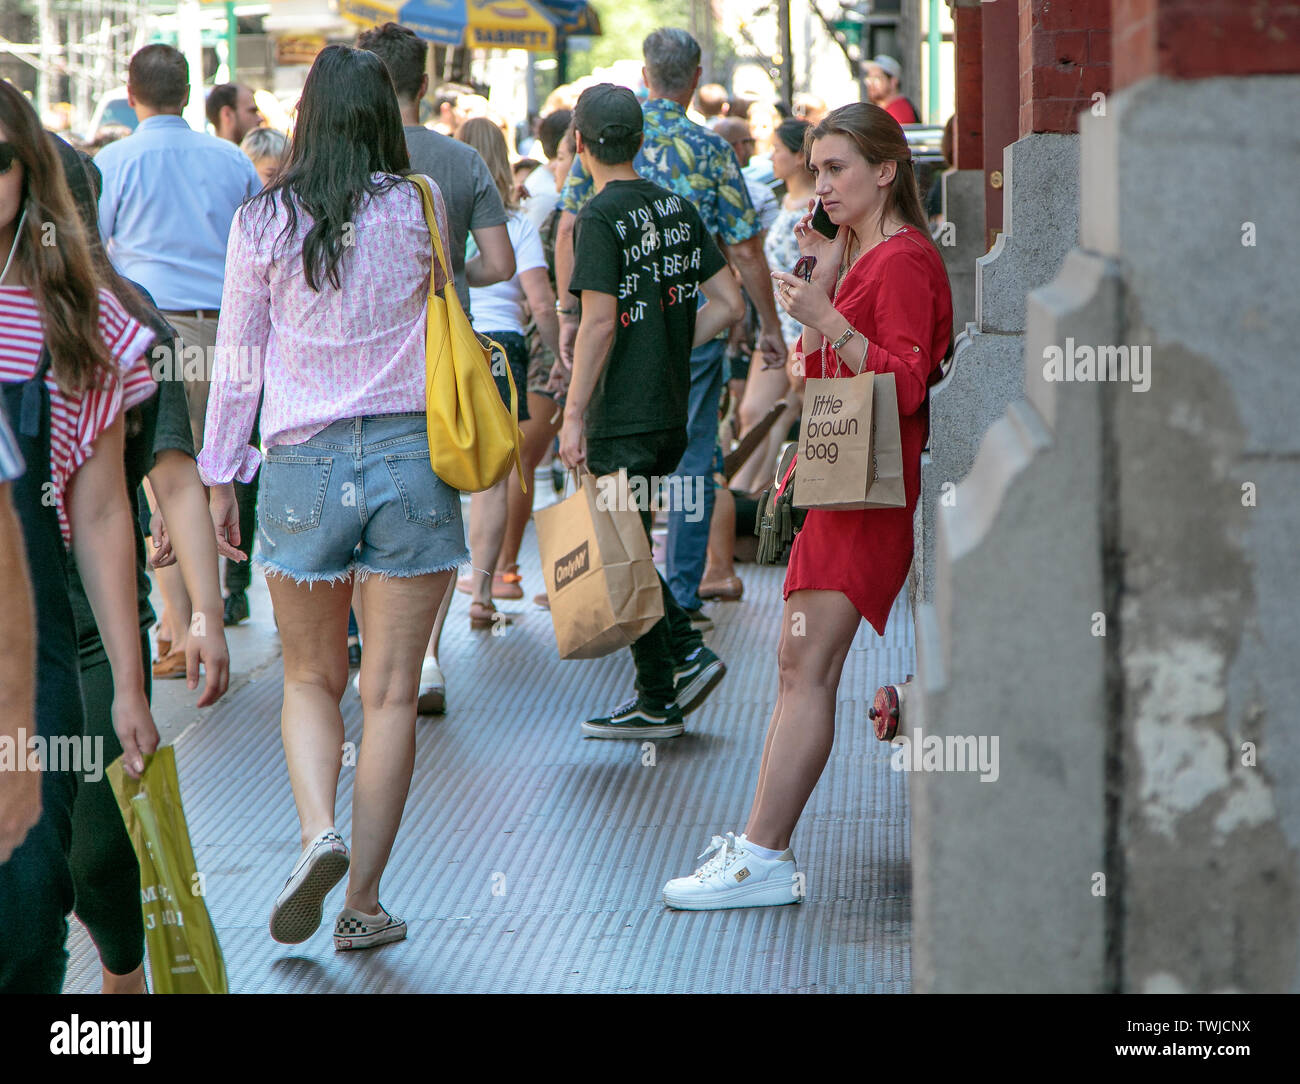 New York, 6/15/2019: Unidentified young lady in a red dress taks on the phone while leaning against a building wall and holding a shopping bag from Bl Stock Photo